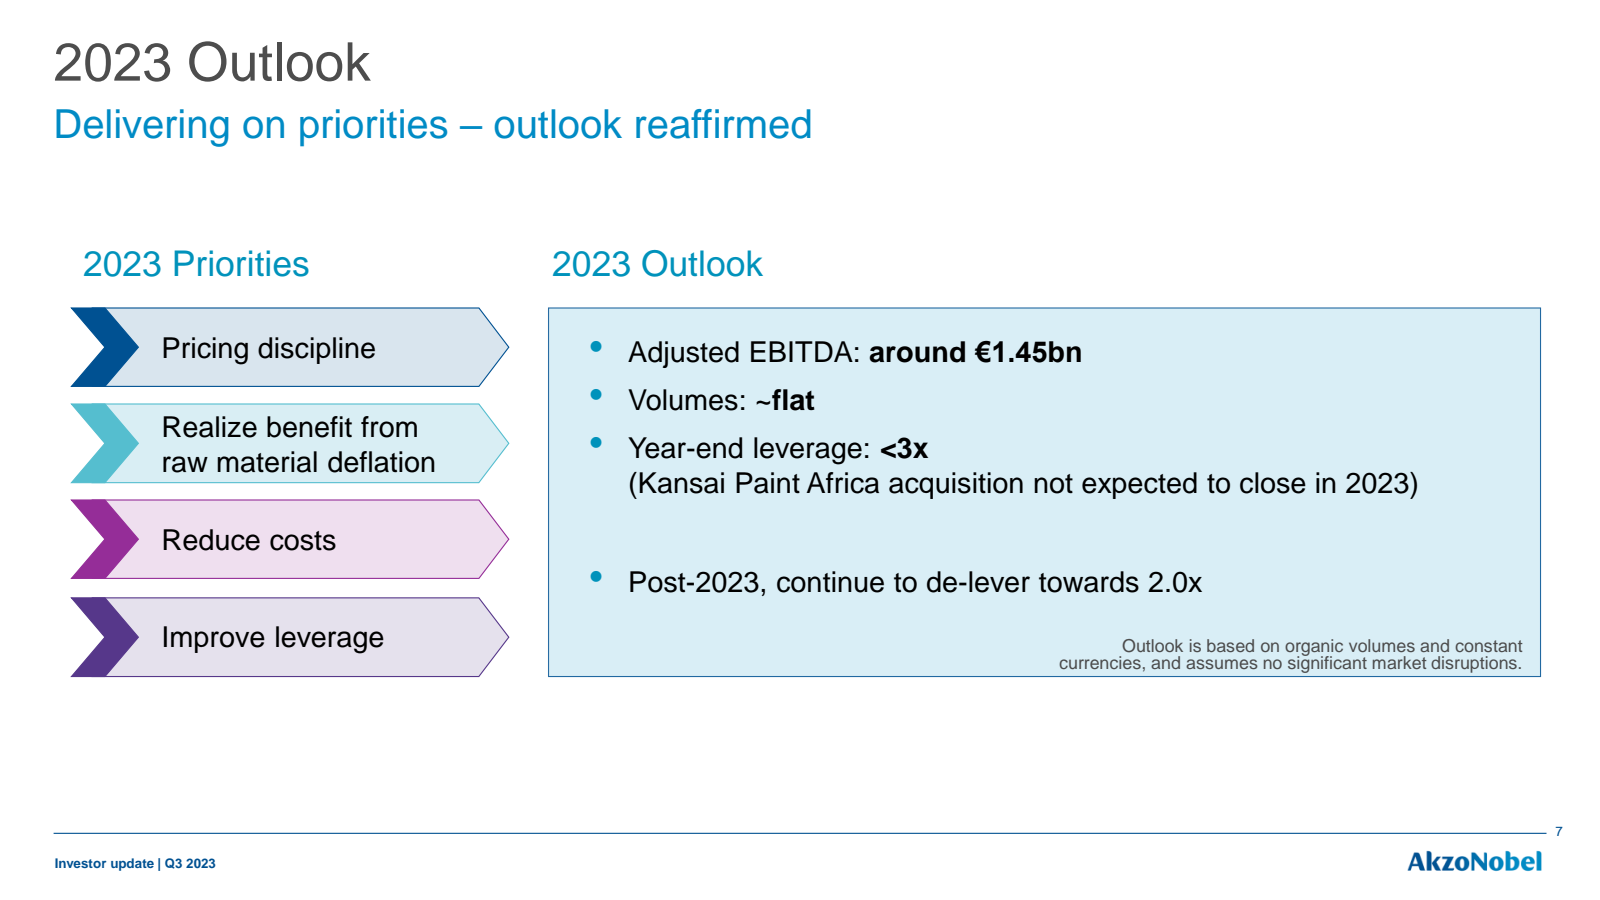 2023 Outlook 
Delive